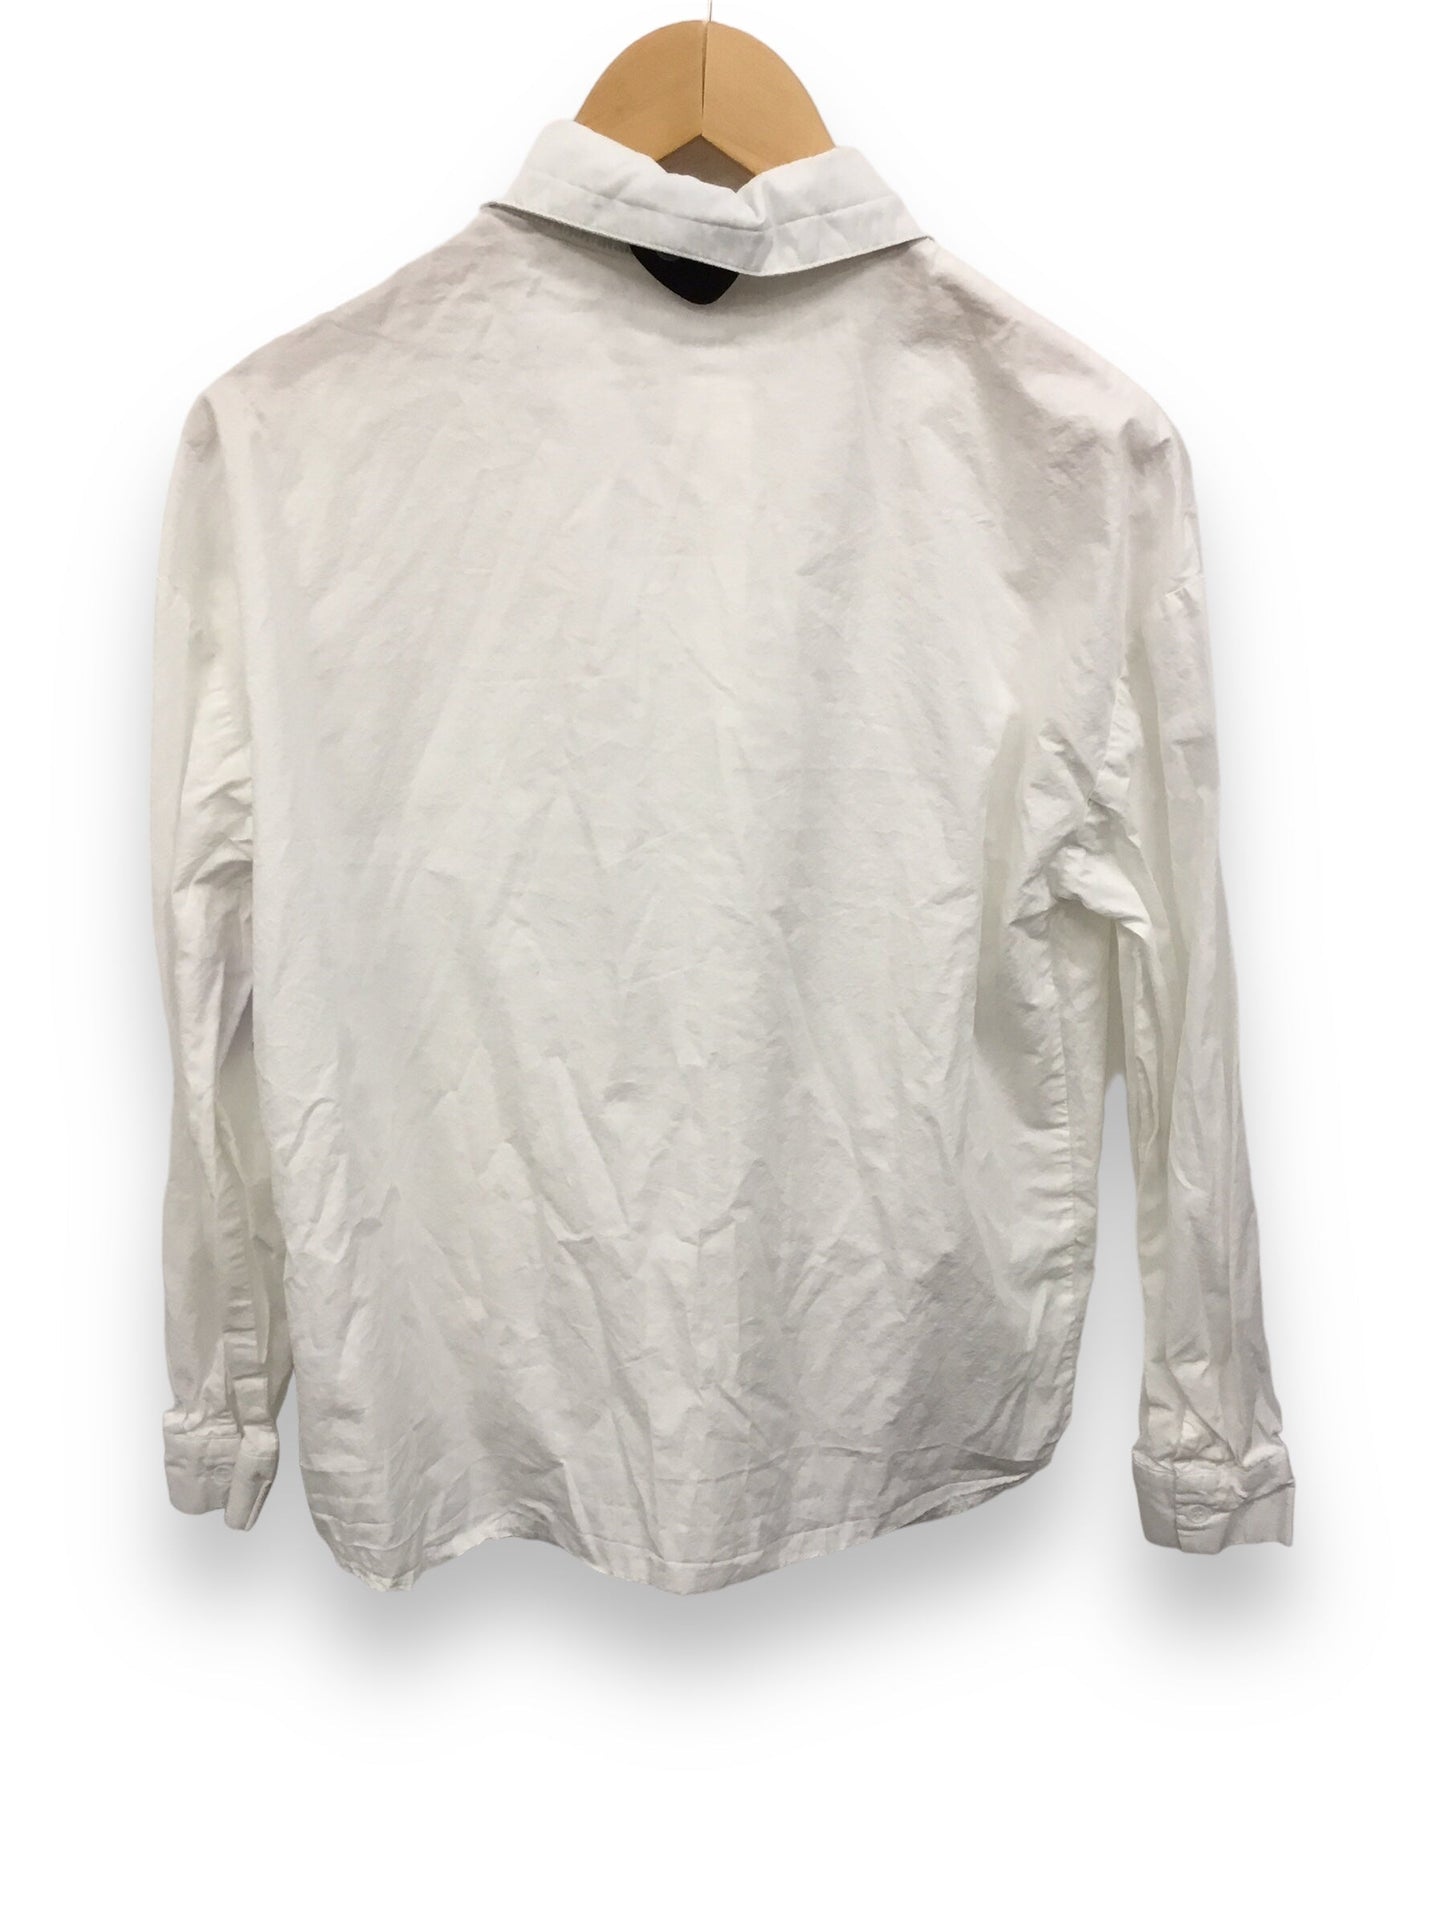 White Top Long Sleeve Clothes Mentor, Size Xs